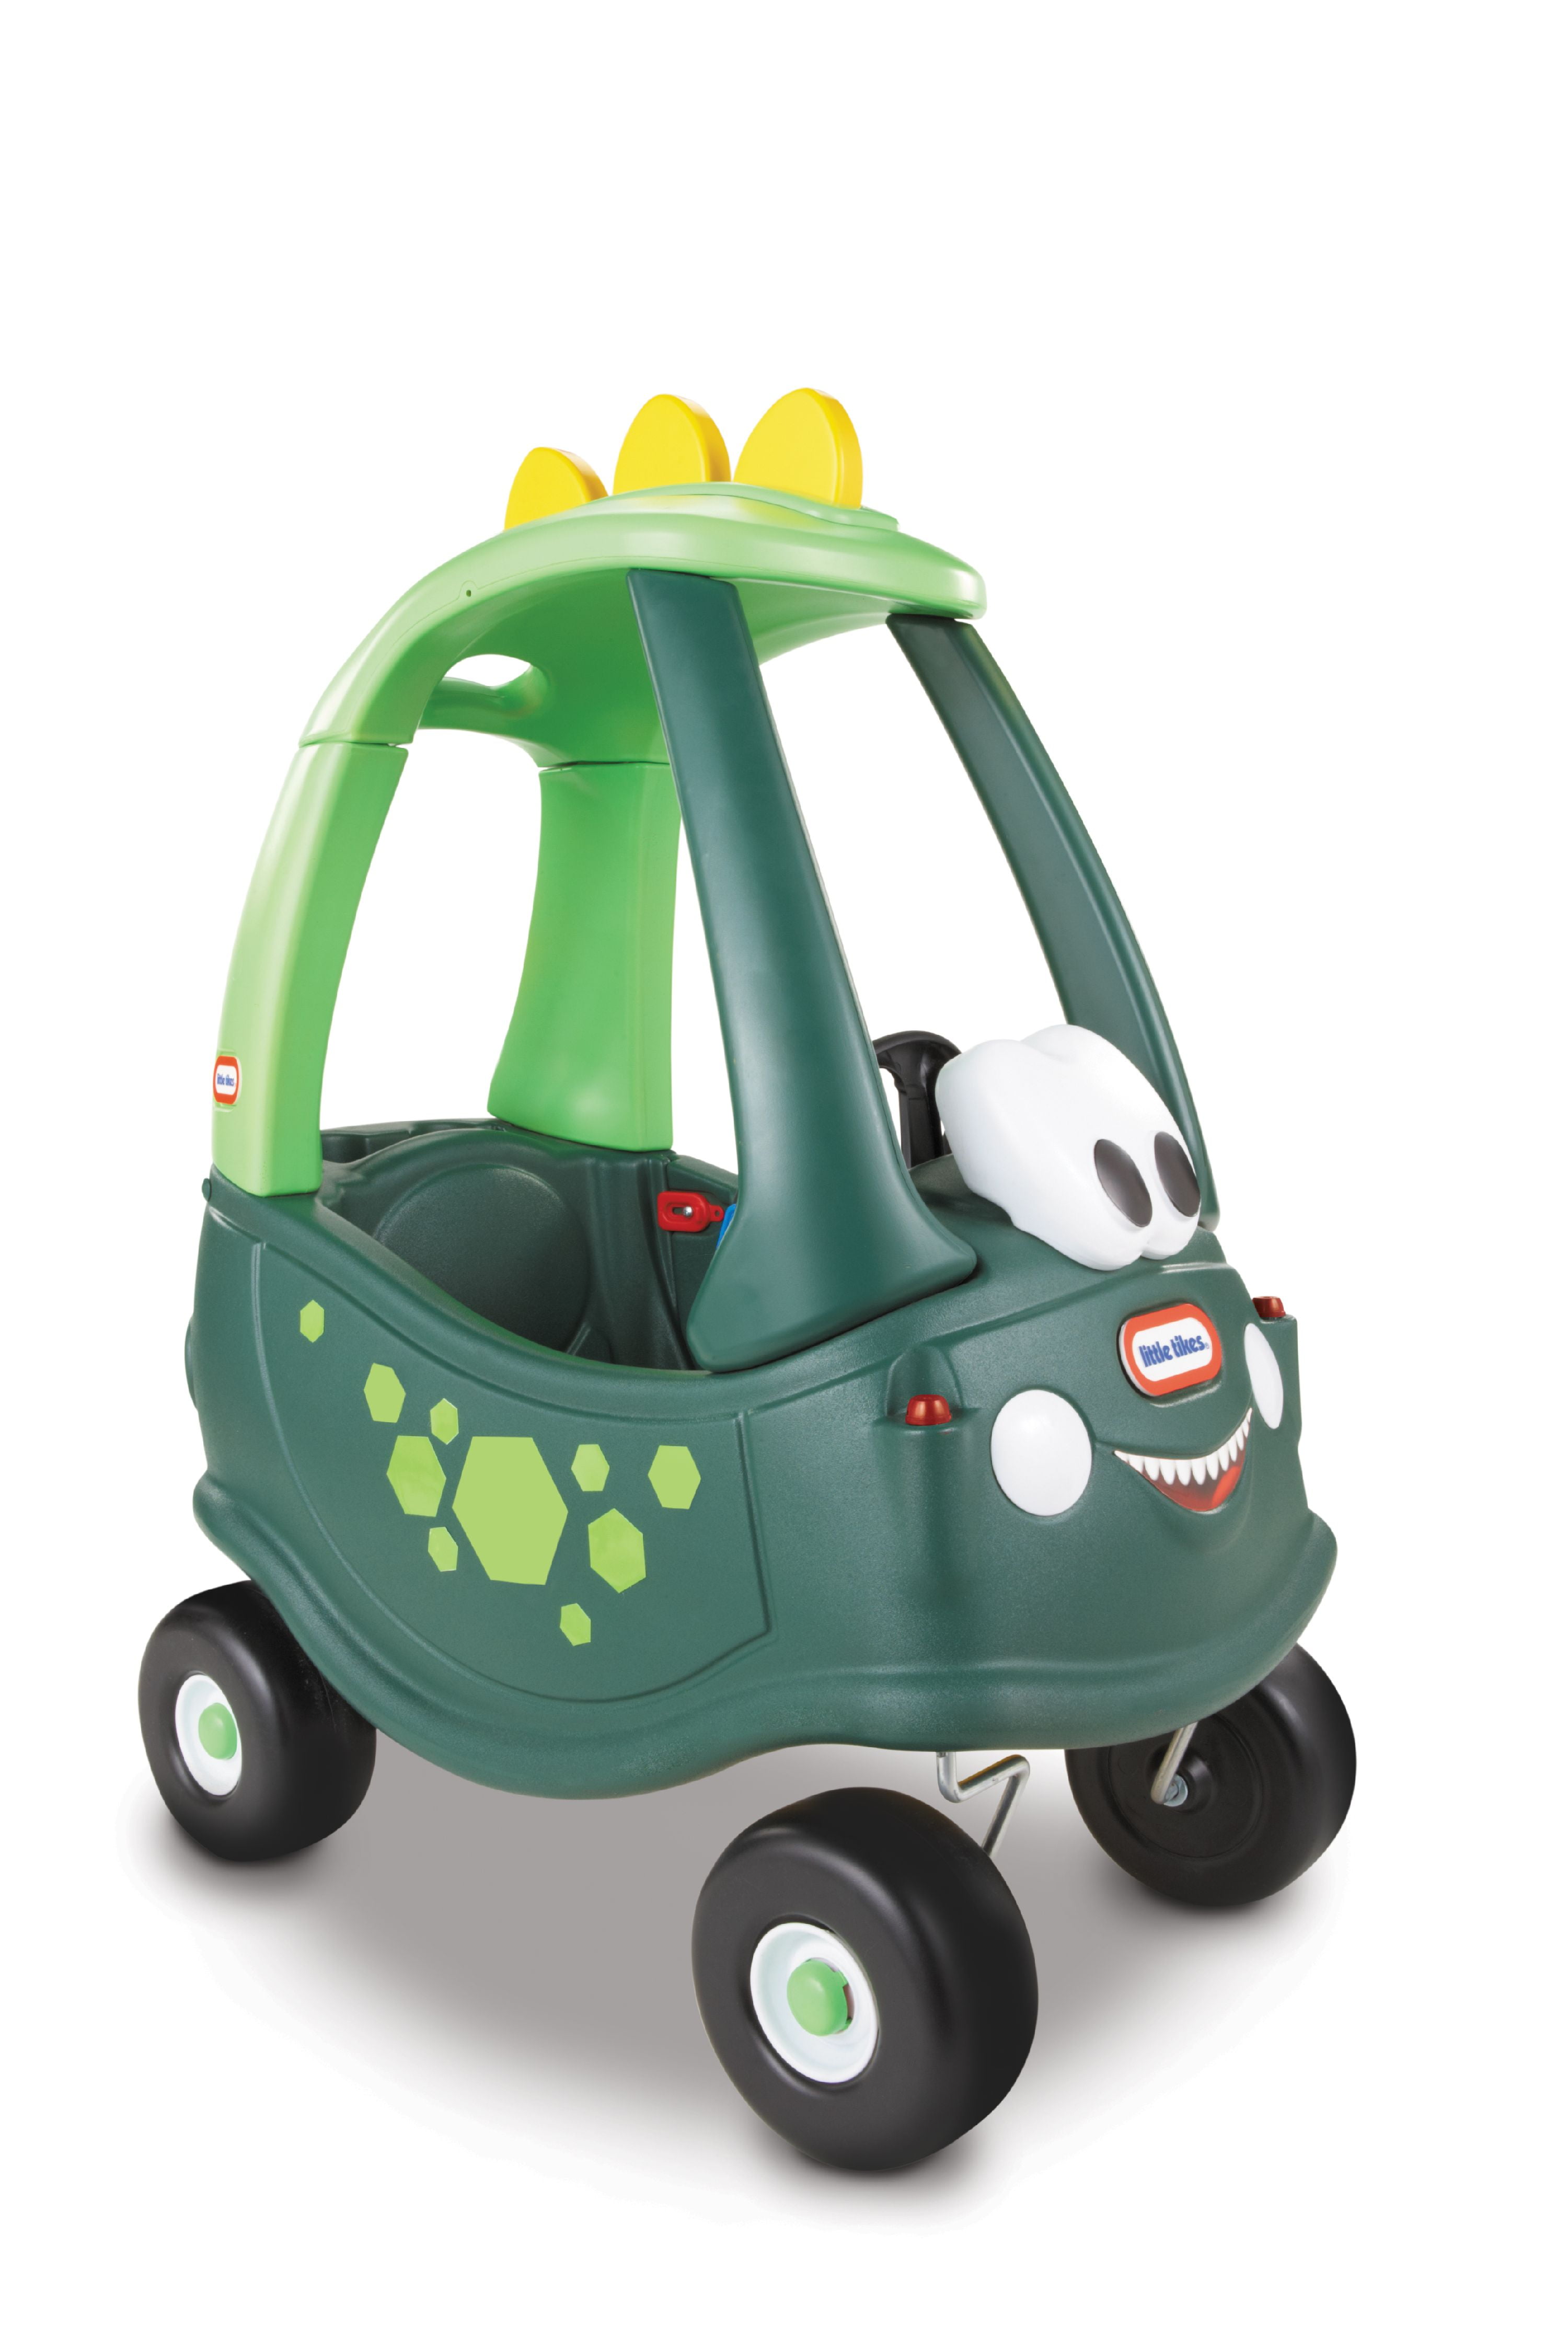 Little Tikes Coupe Dino Foot-to-Floor Toddler Car - For Kids Boys Girls Ages 18 Months to 5 Years Old - Walmart.com